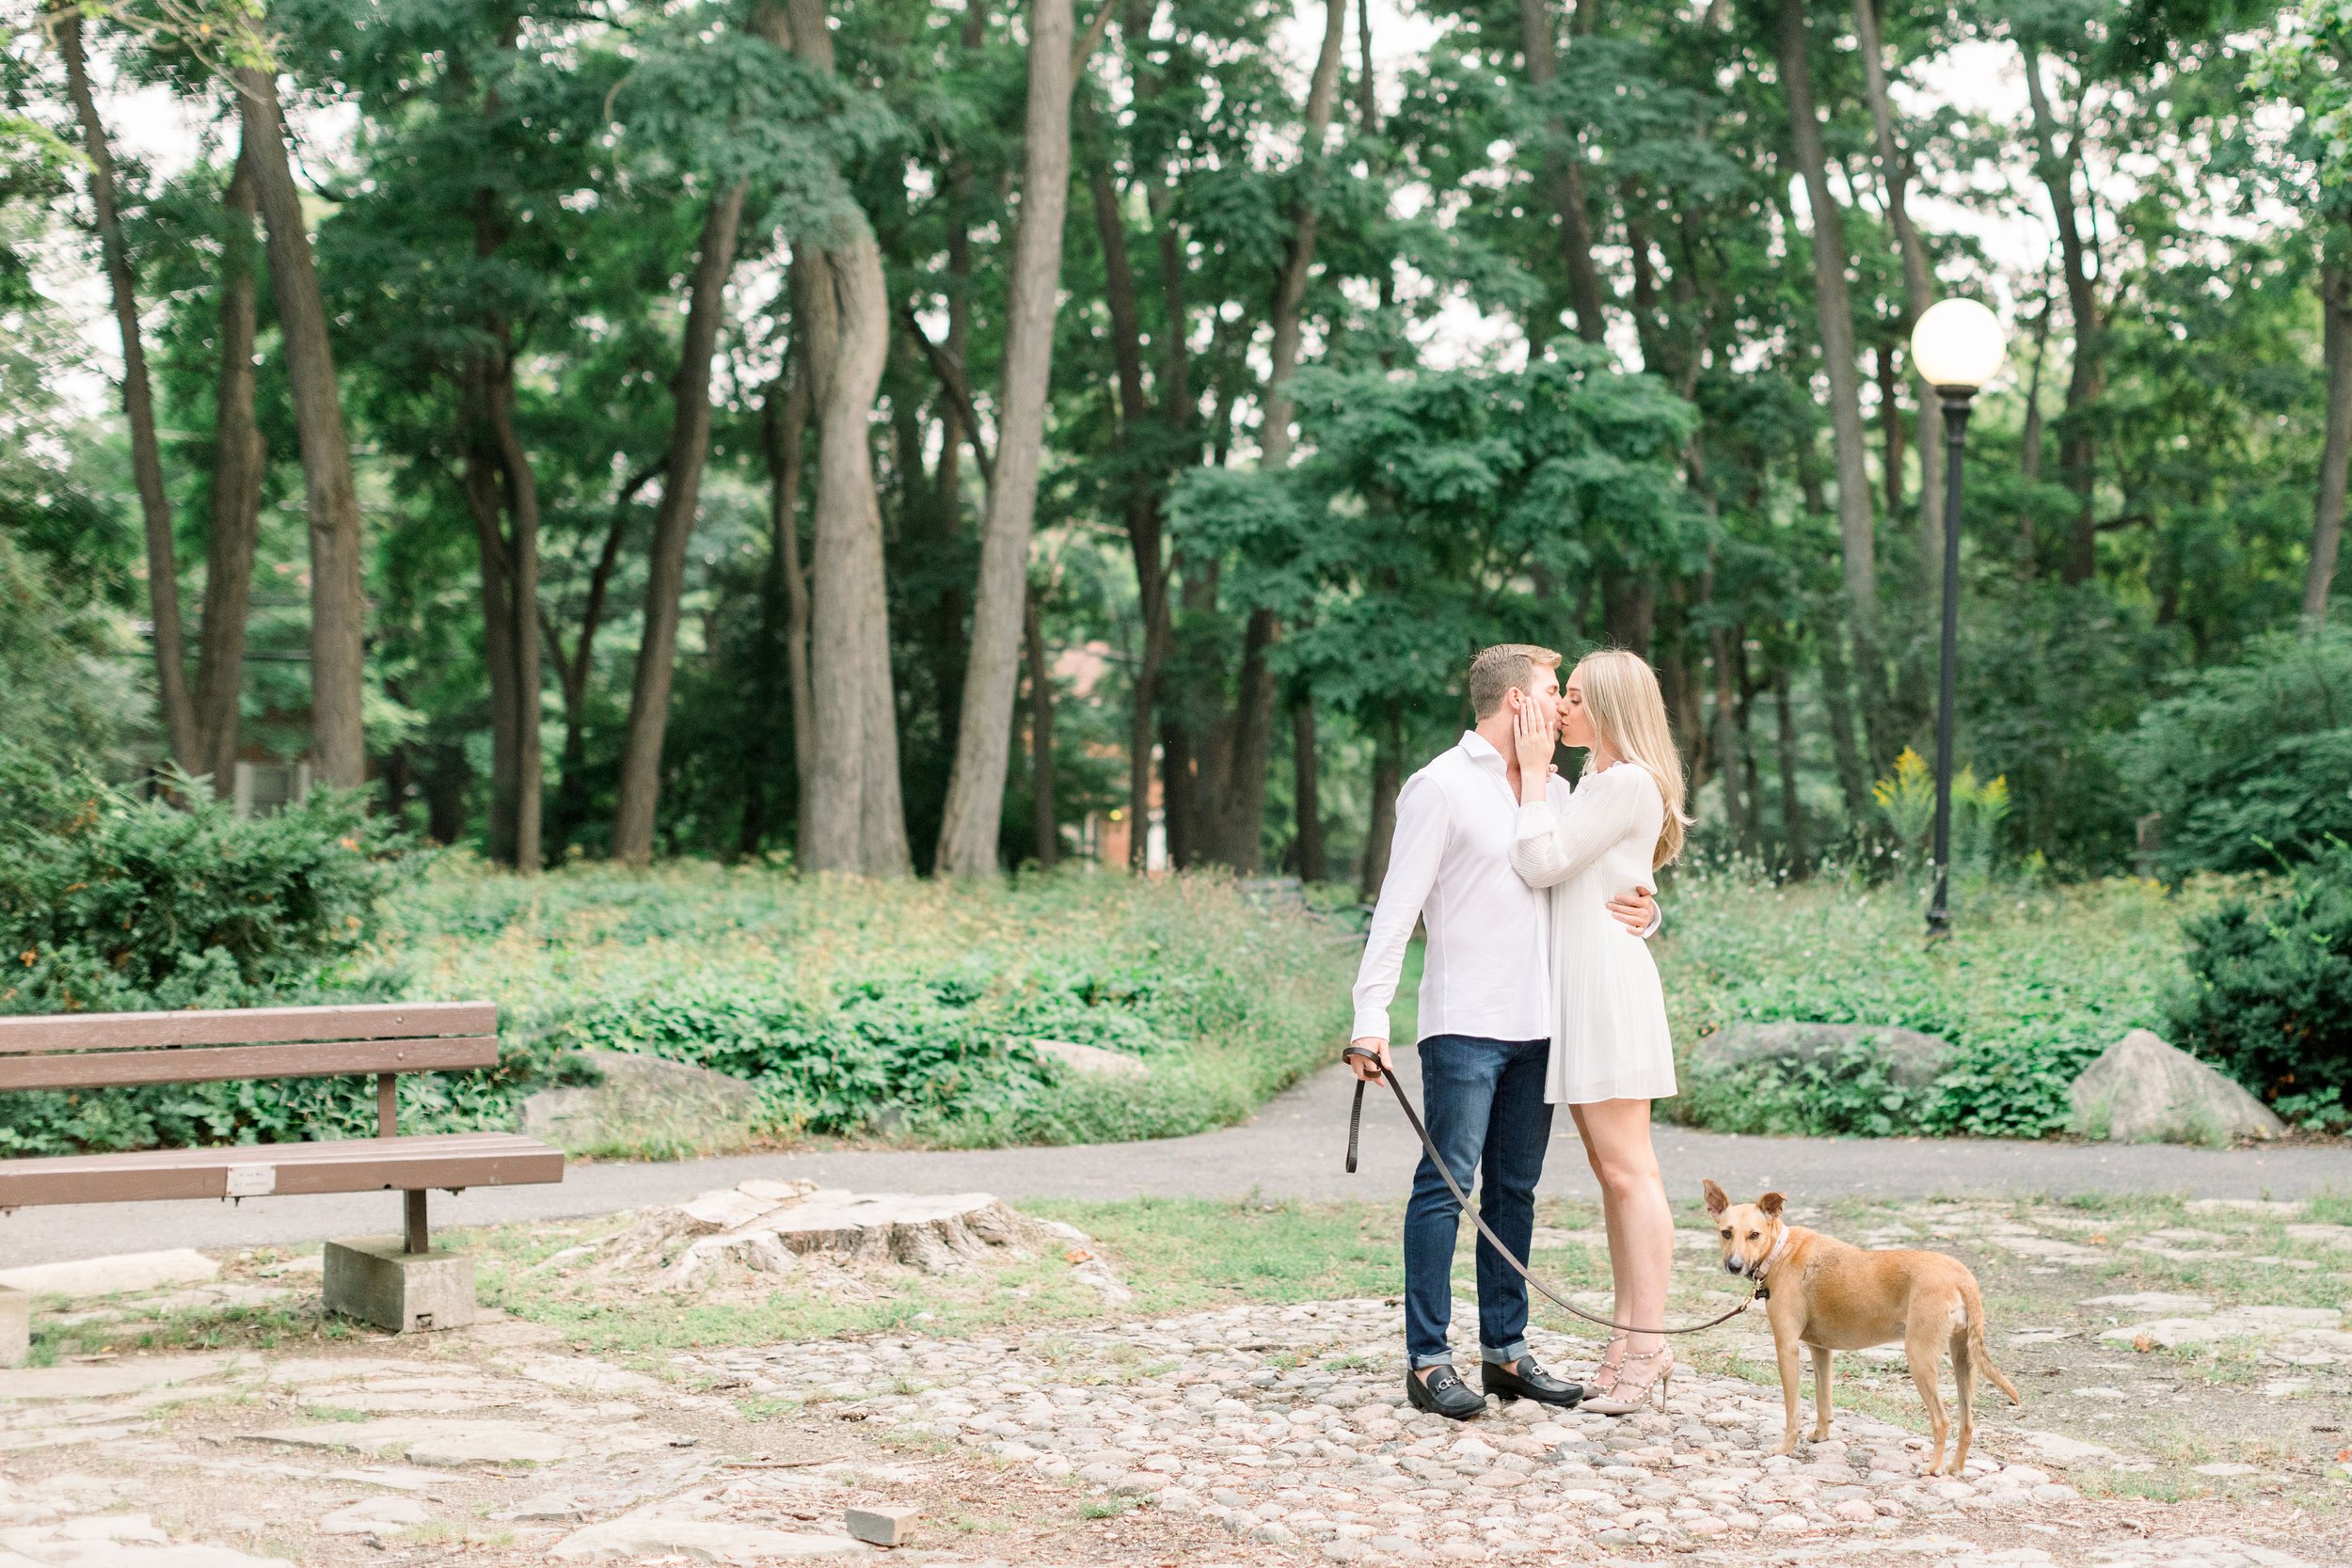  Chelsea Mason Photography captures a scenic portrait of a soon-to-be-married couple kissing in a park. nature engagement photography #Ottawaengagements #Ottawaweddingphotographers #engagementwithdogs #ChelseaMasonPhotography #ChelseaMasonEngagements